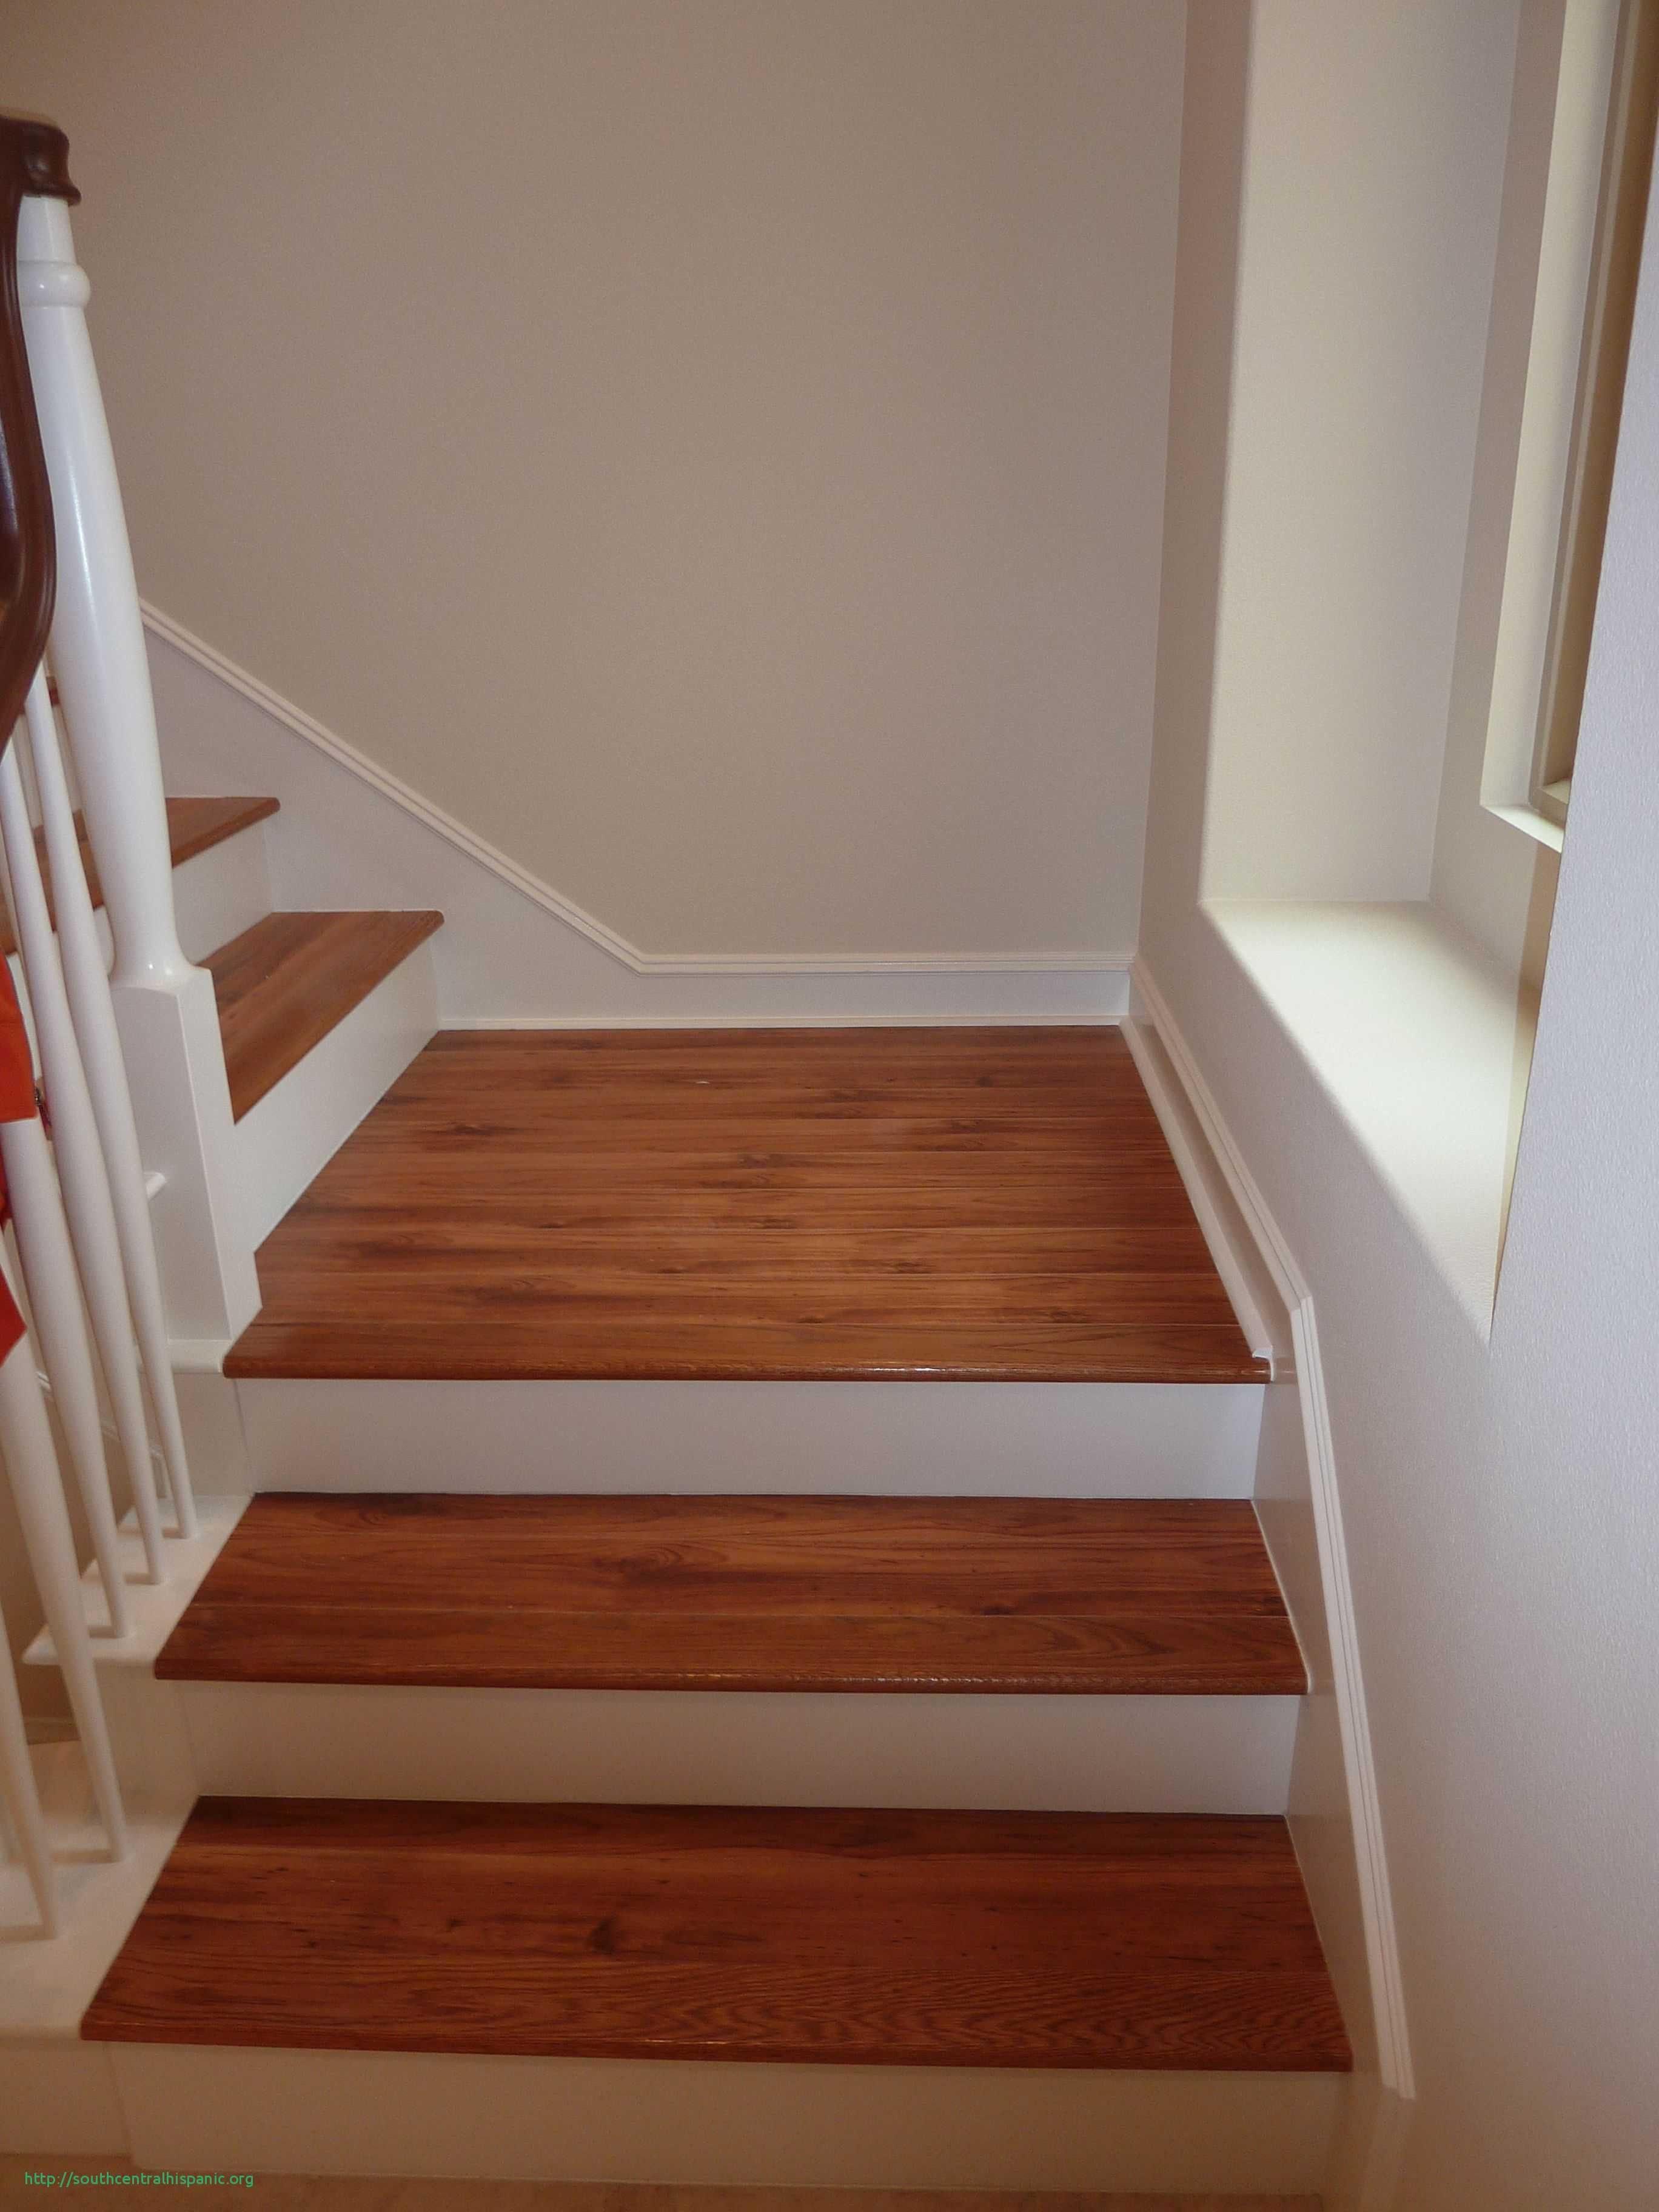 how to install hardwood flooring on stairs of how to put laminate flooring on stairs impressionnant how to install with regard to how to put laminate flooring on stairs alagant laminate floor stairs google search flooring